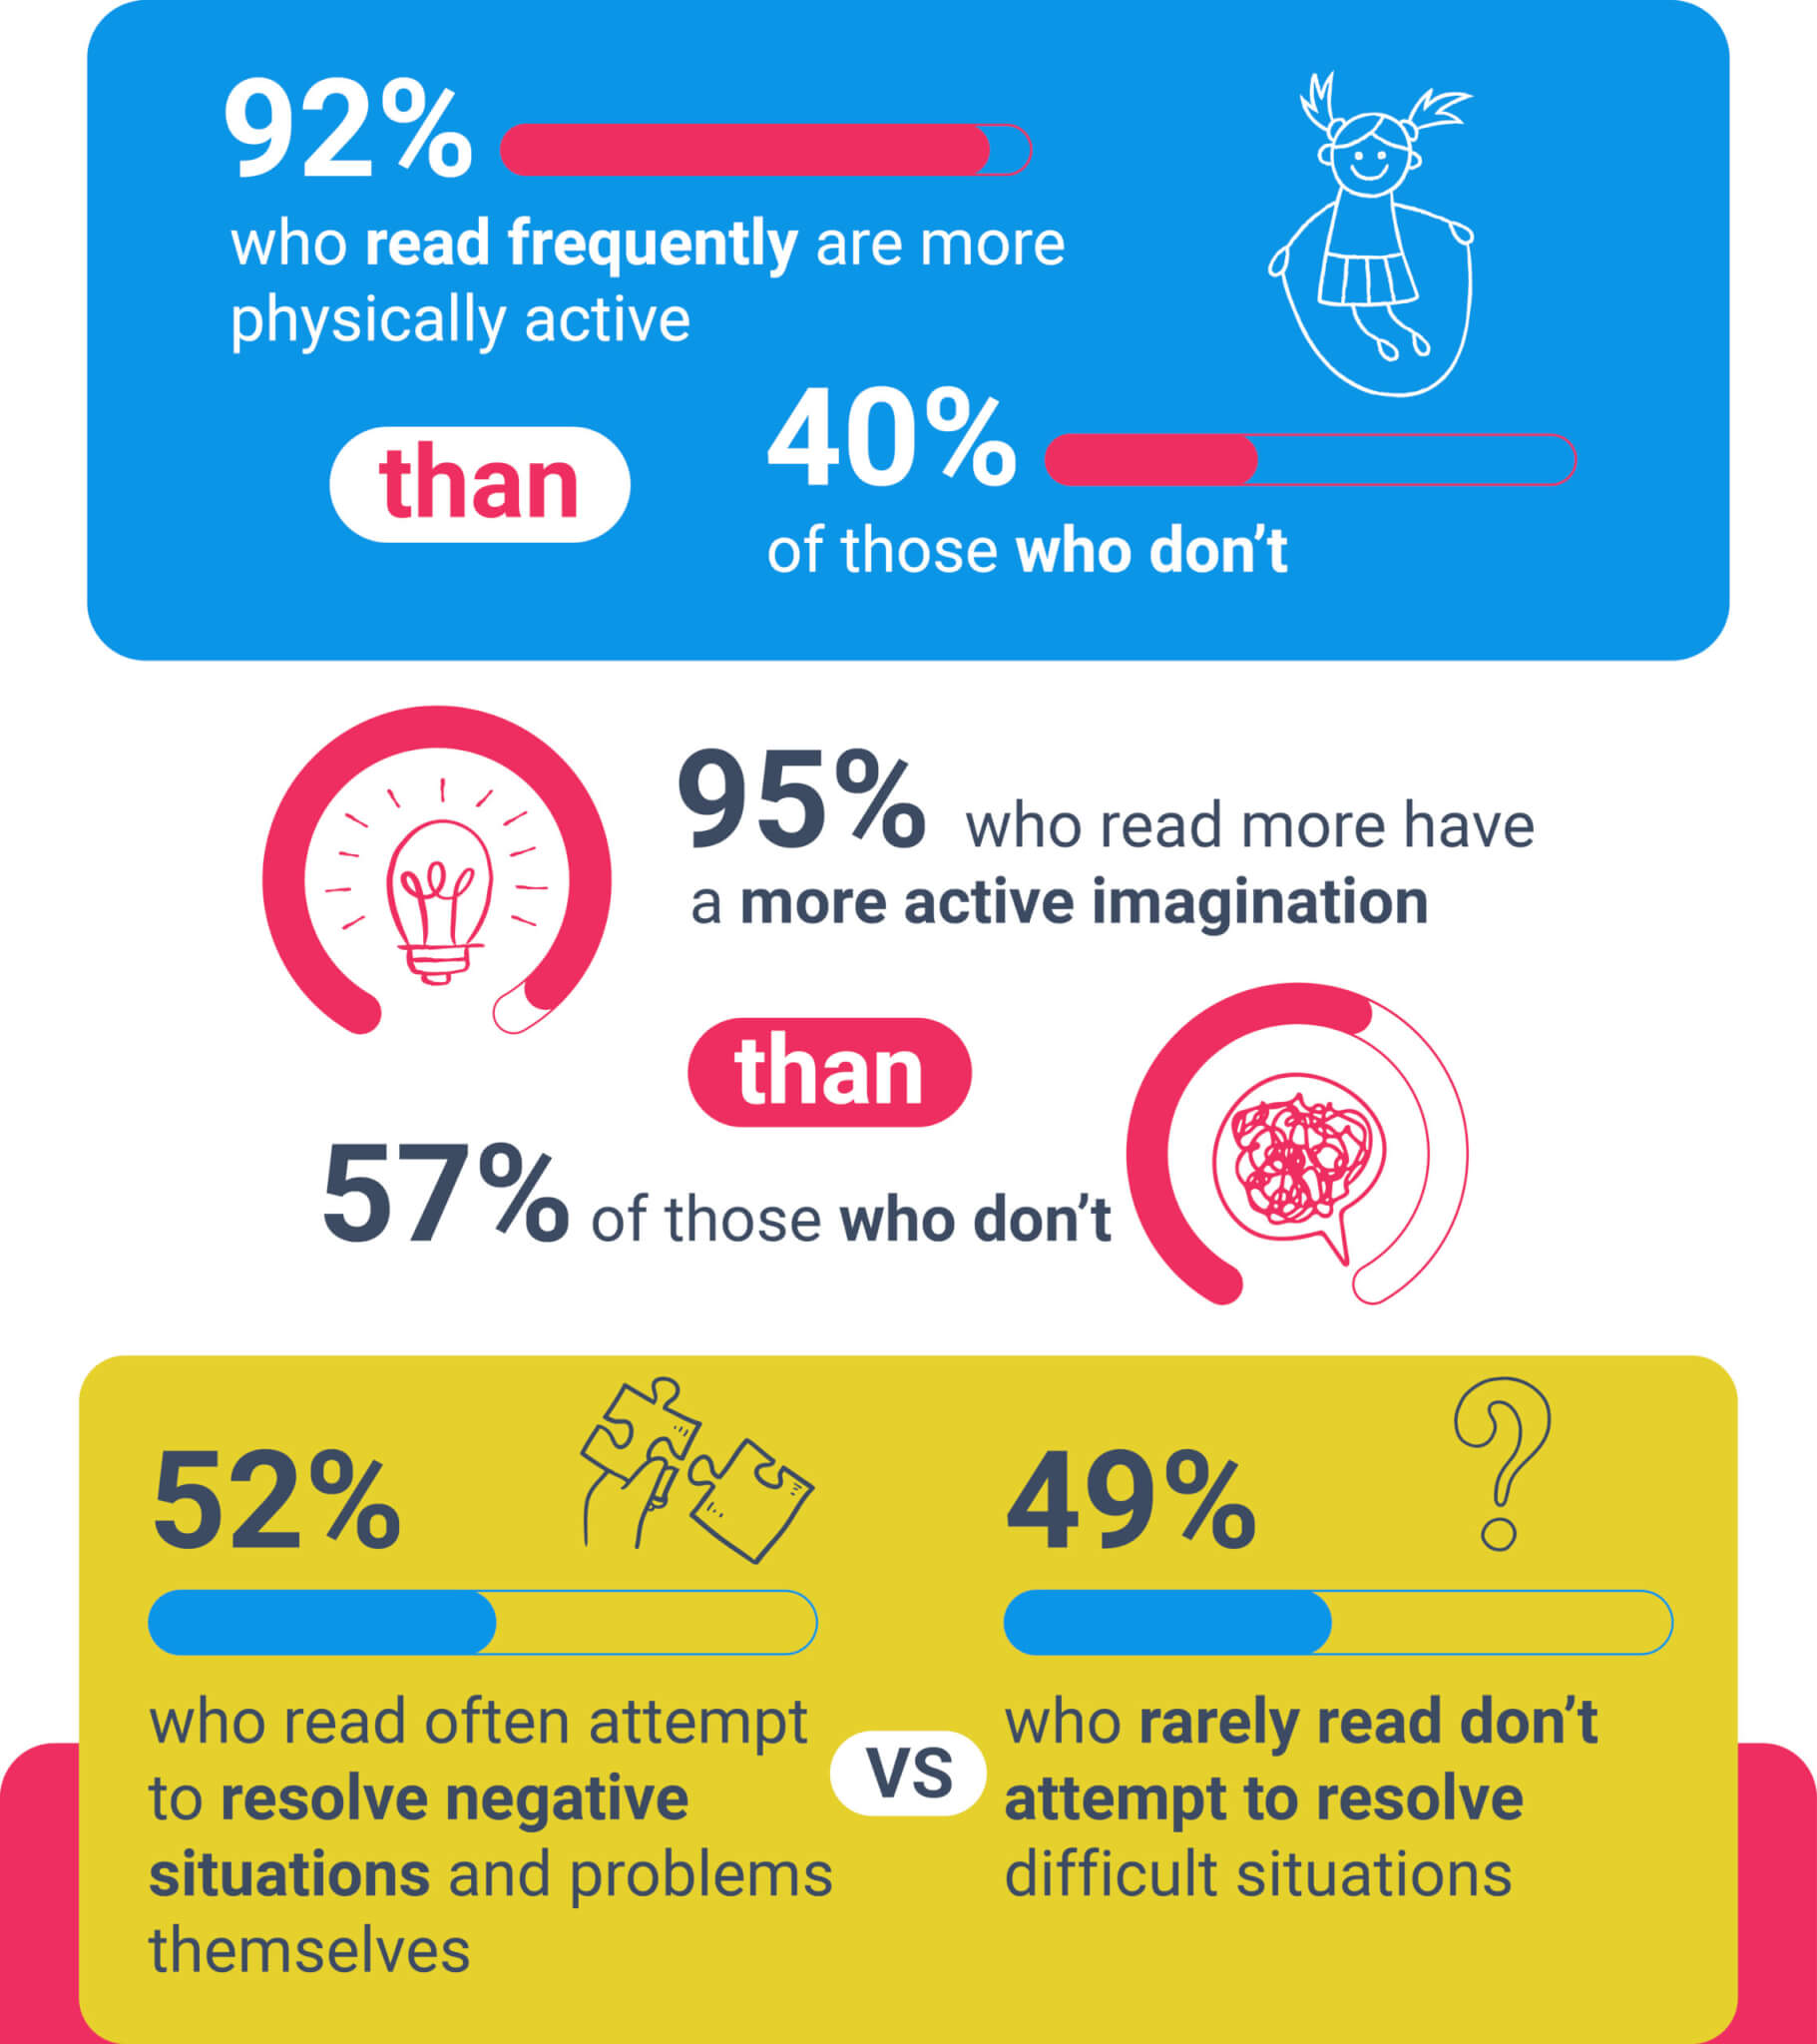 Children who read SWNS infographic